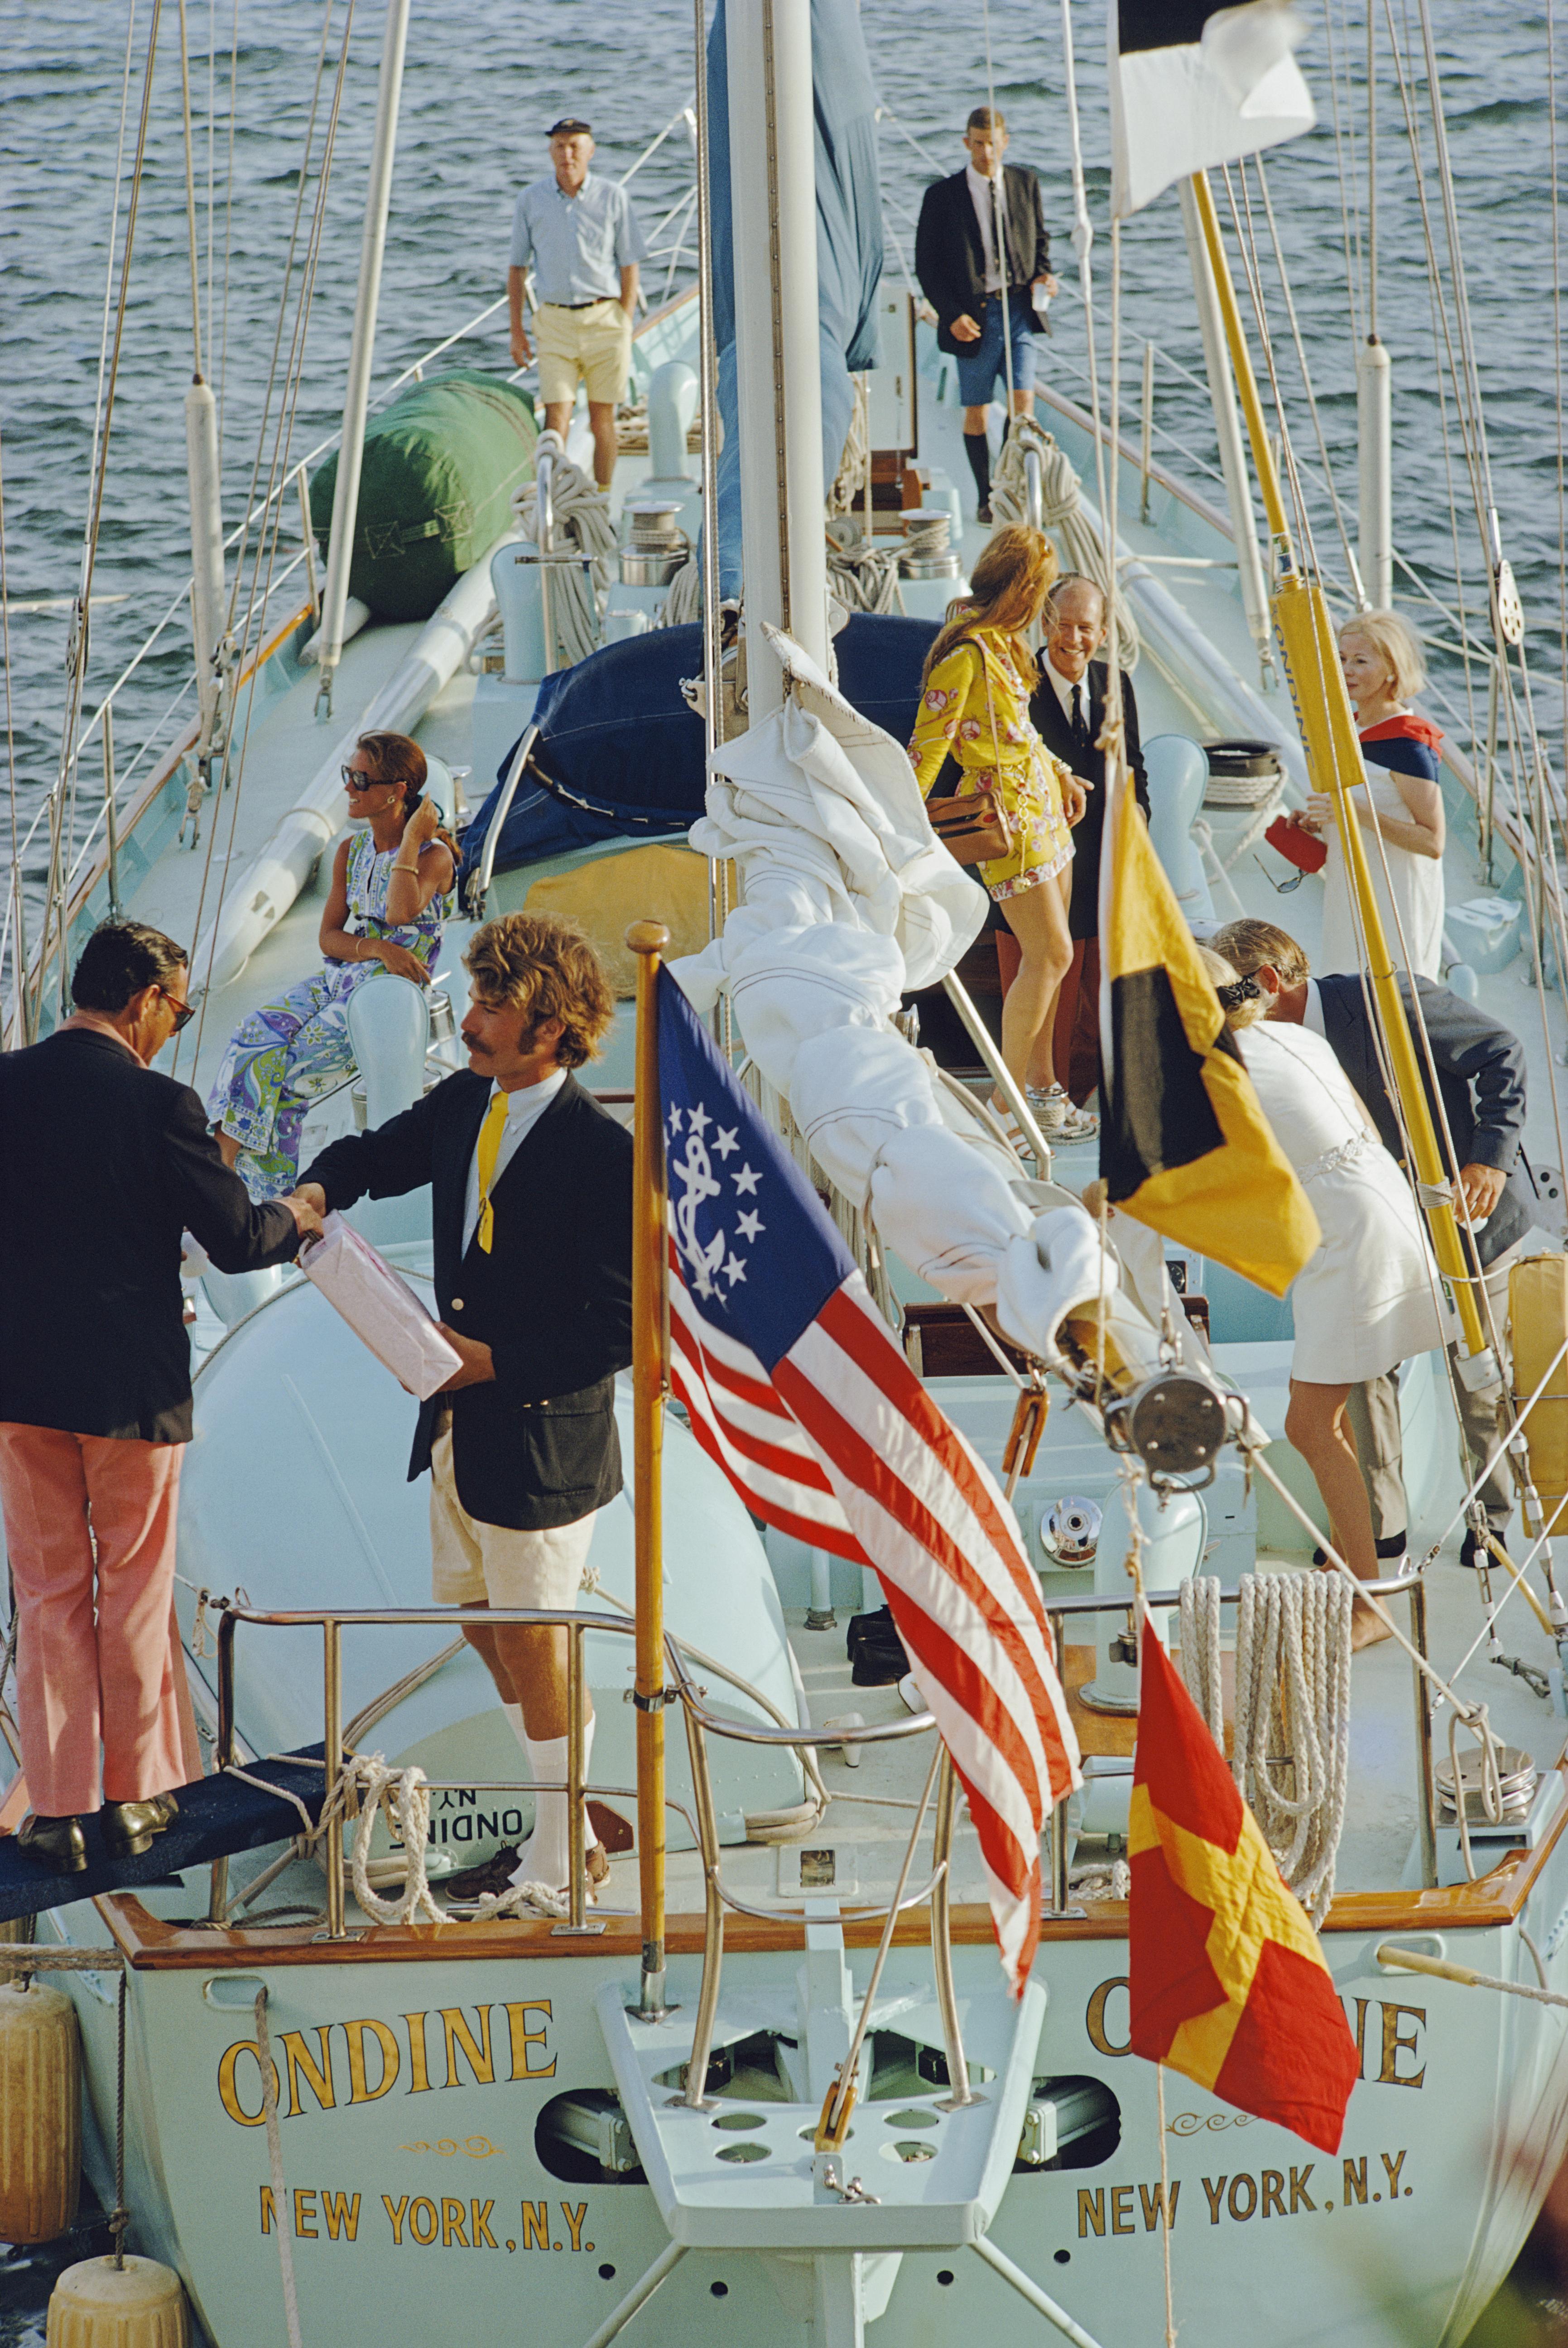 Slim Aarons
Party In Bermuda
1970 (printed later)
C print

A party on the deck of the yacht 'Ondine' in Bermuda, June 1970.

Estate stamped and hand numbered edition of 150 with certificate of authenticity from the estate. 

Slim Aarons (1916-2006)